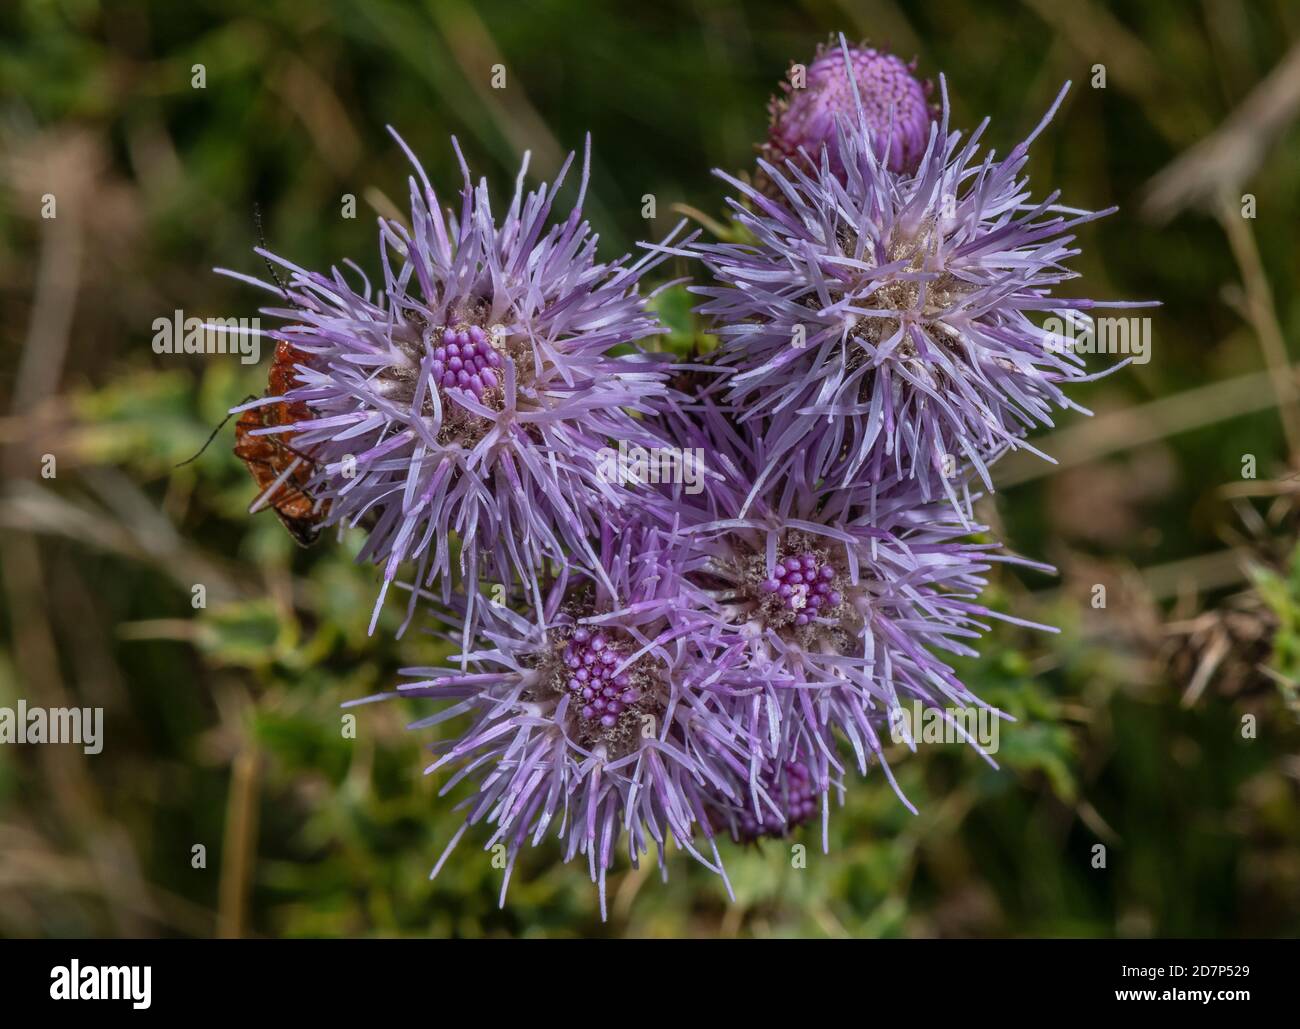 Creeping thistle, Cirsium arvense, in full flower. Widespread weed. Stock Photo